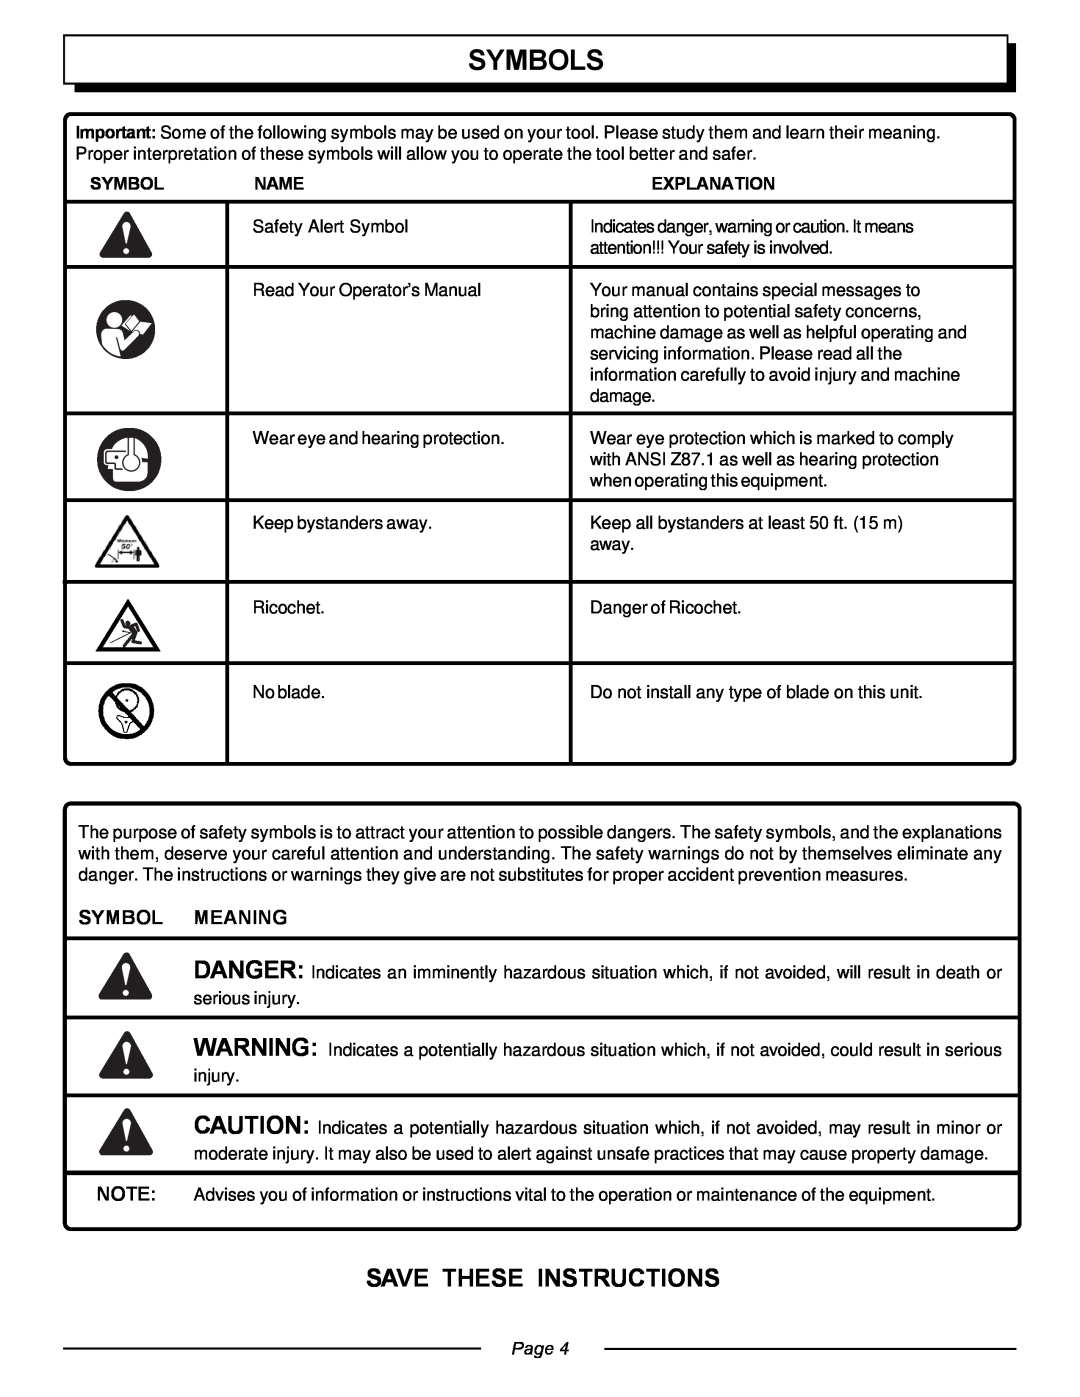 Homelite UT20763 manual Symbols, Save These Instructions, Symbol Meaning, Name, Explanation, Page 